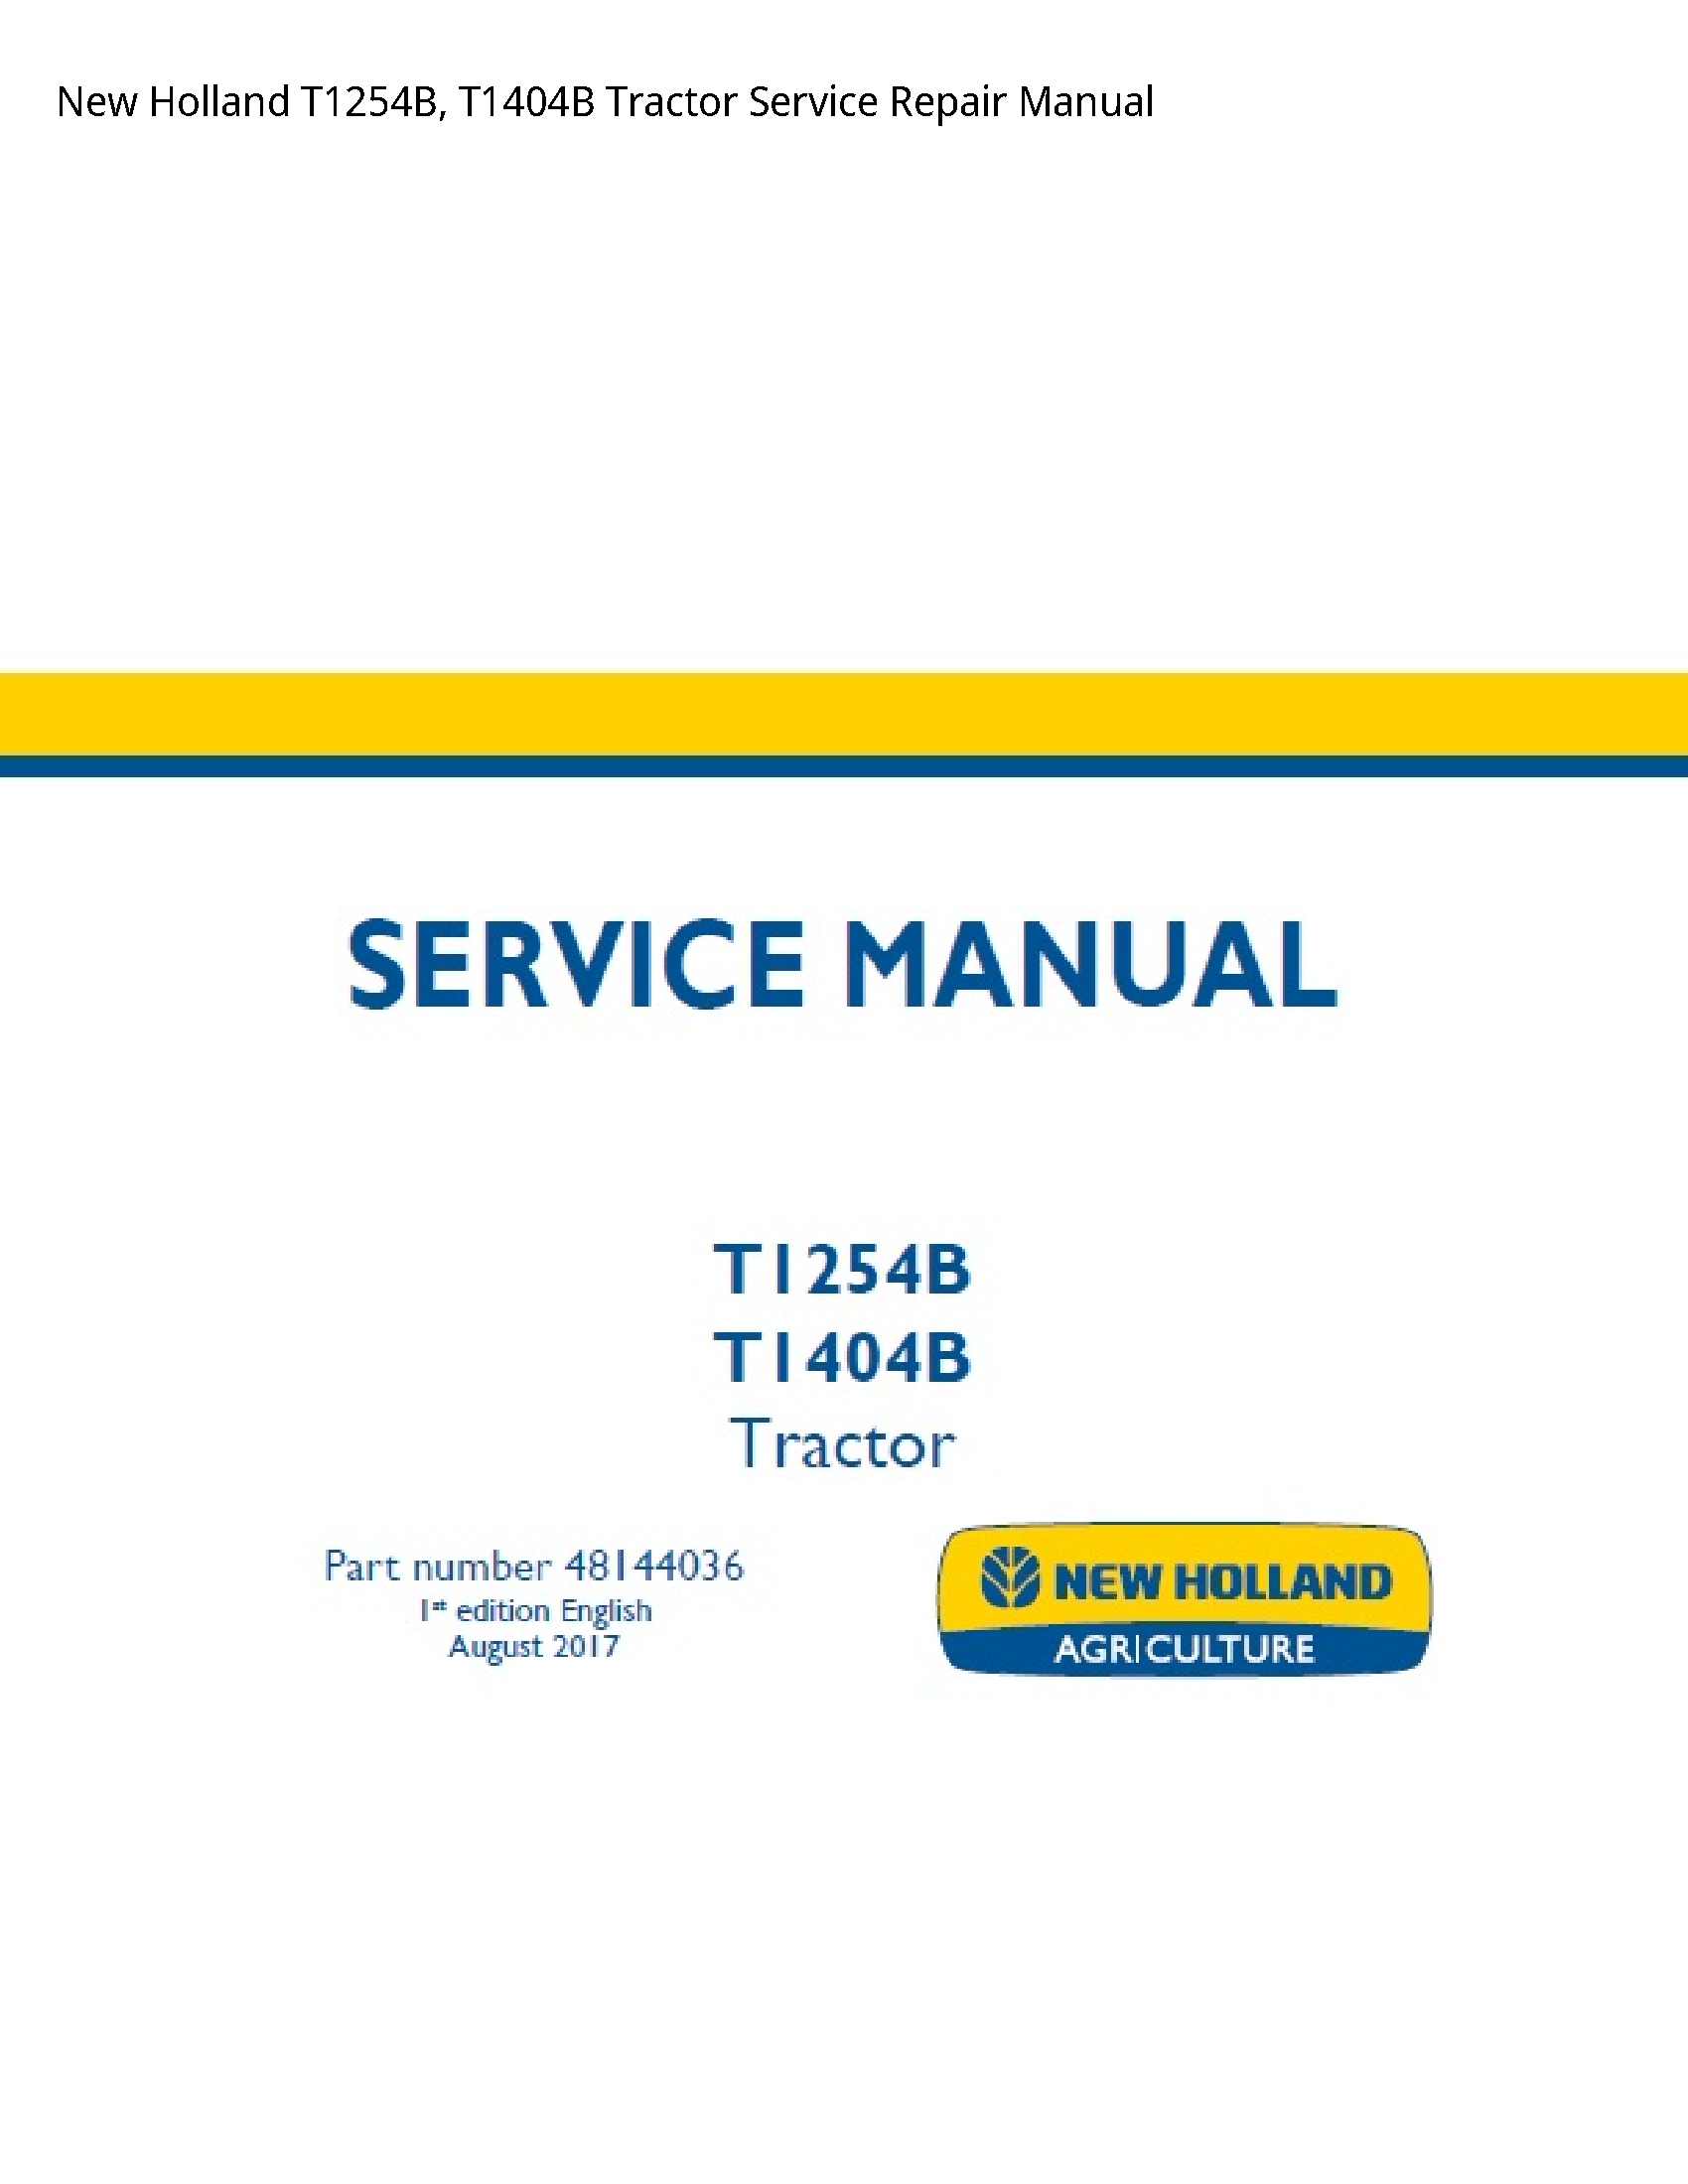 New Holland T1254B Tractor manual